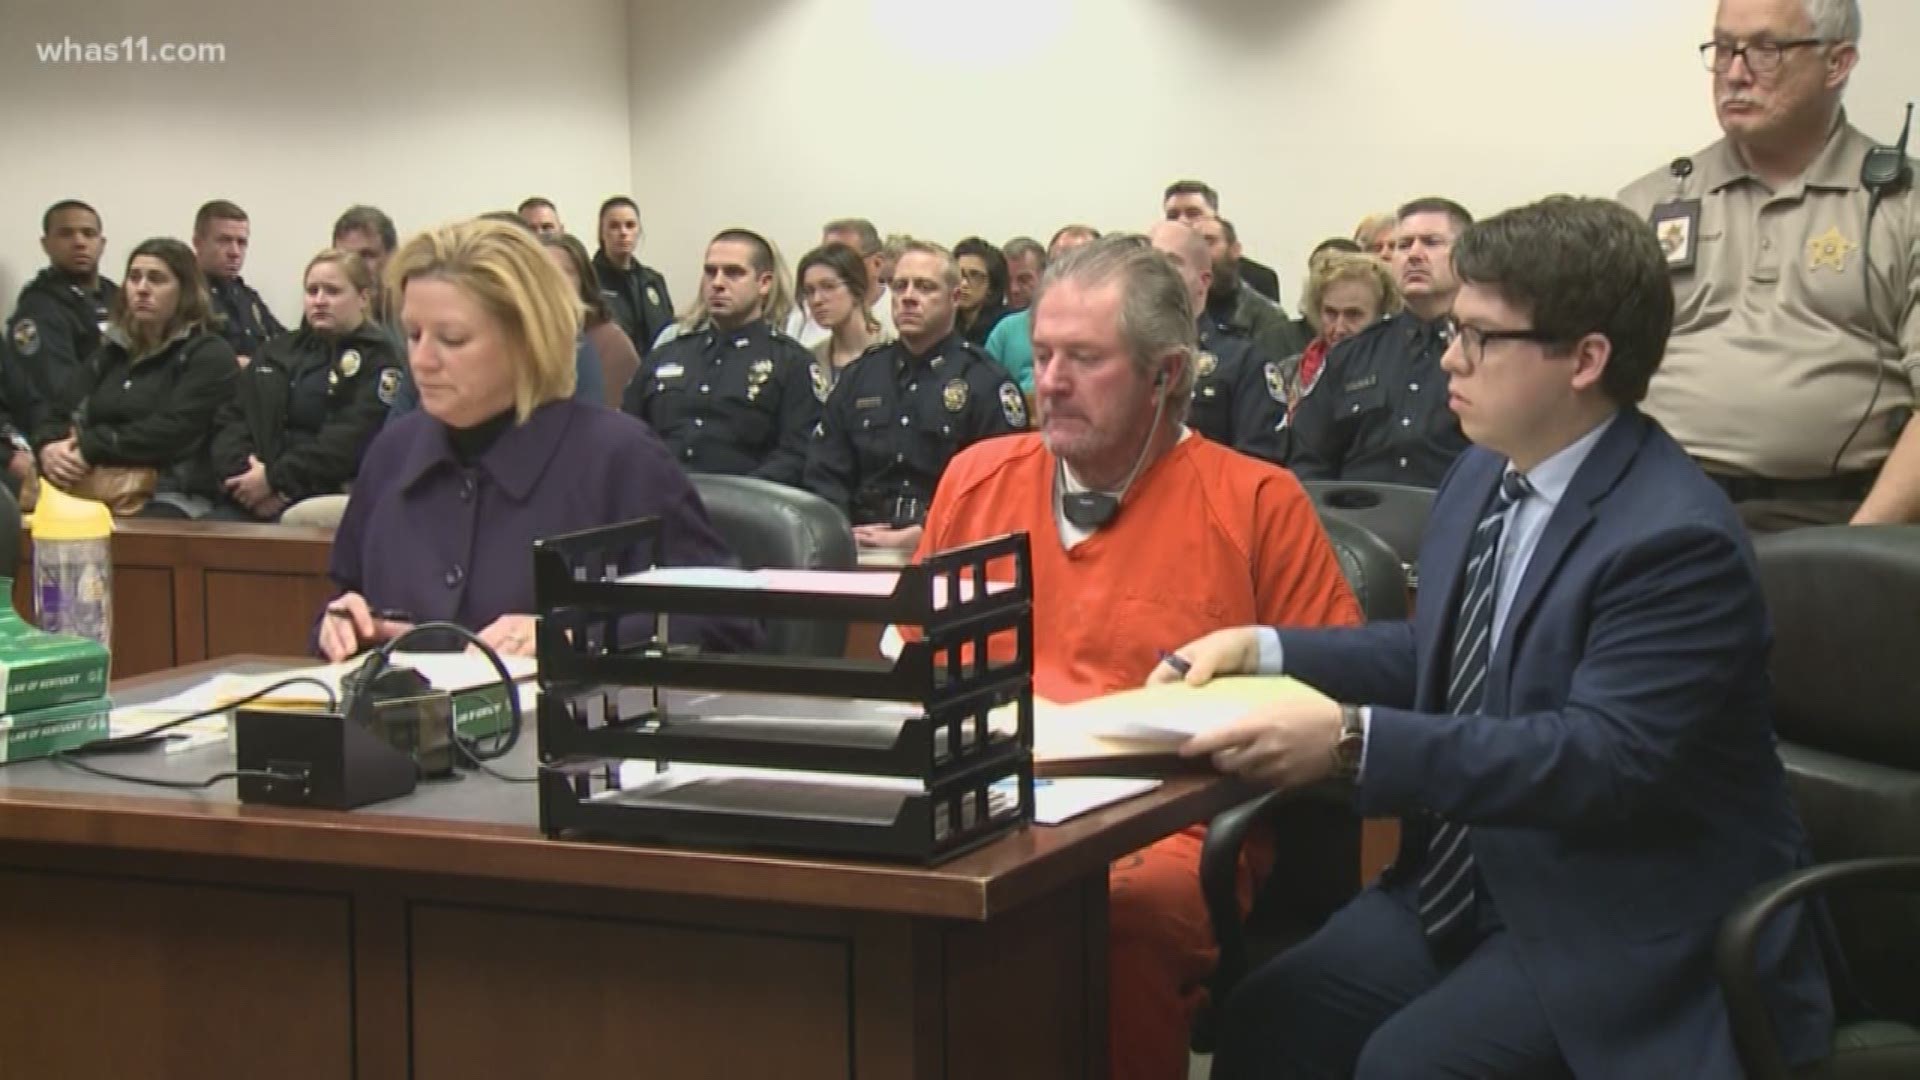 The courtroom was packed with officers on Jan. 9 to show their support for the fallen officer. Burdette's bond remains at $200,000.